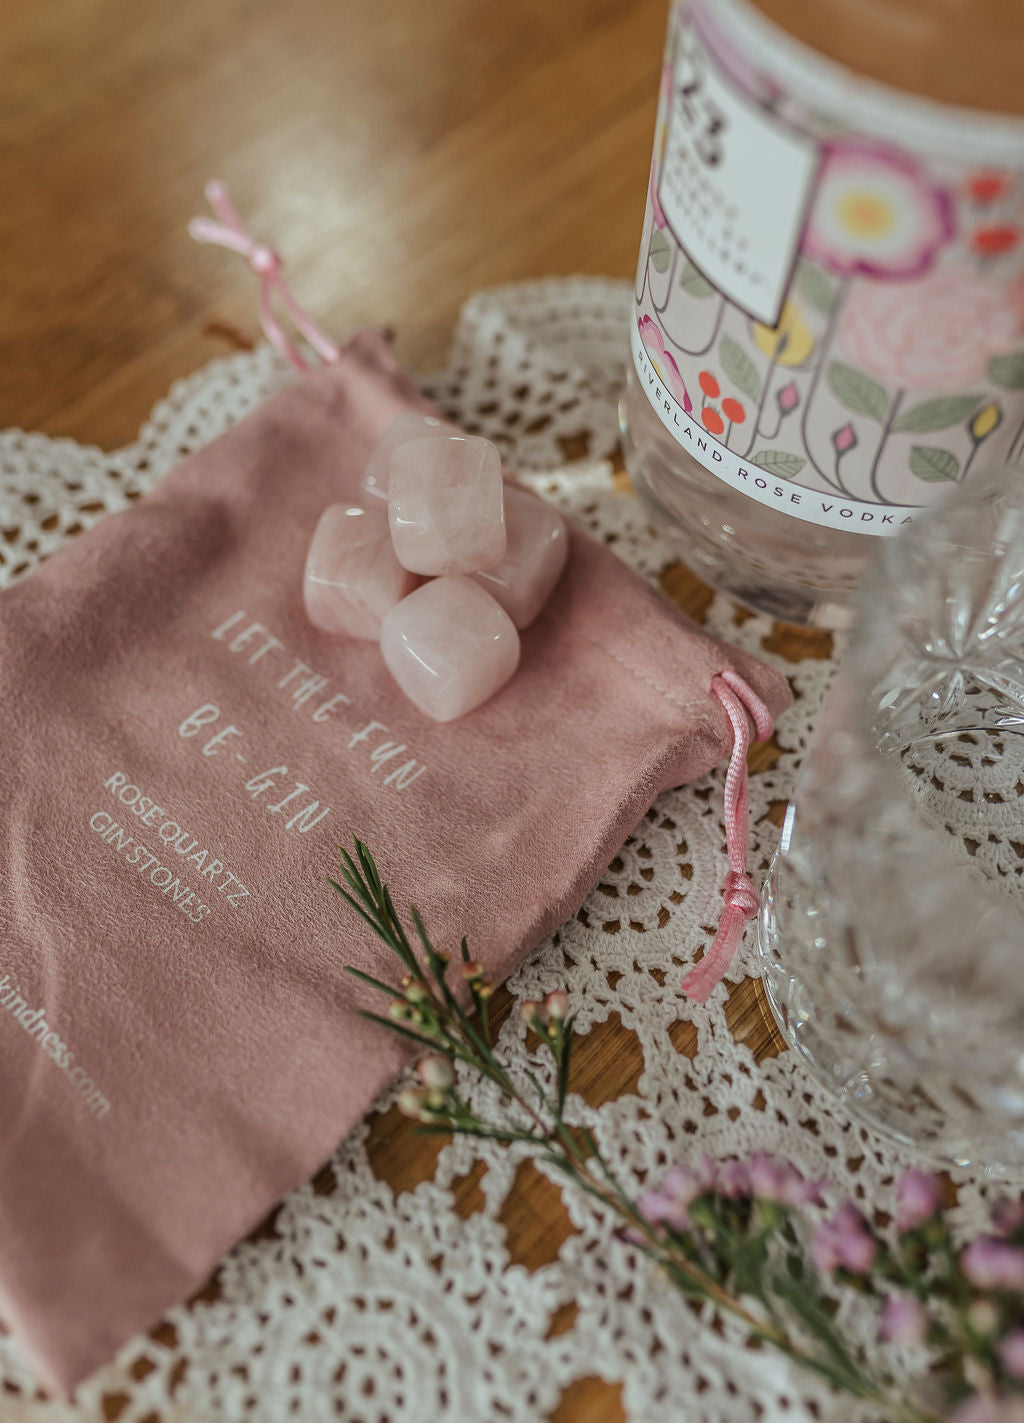 five rose quartz gin stones  displayed with pouch, gin bottle and glass in laced mantle